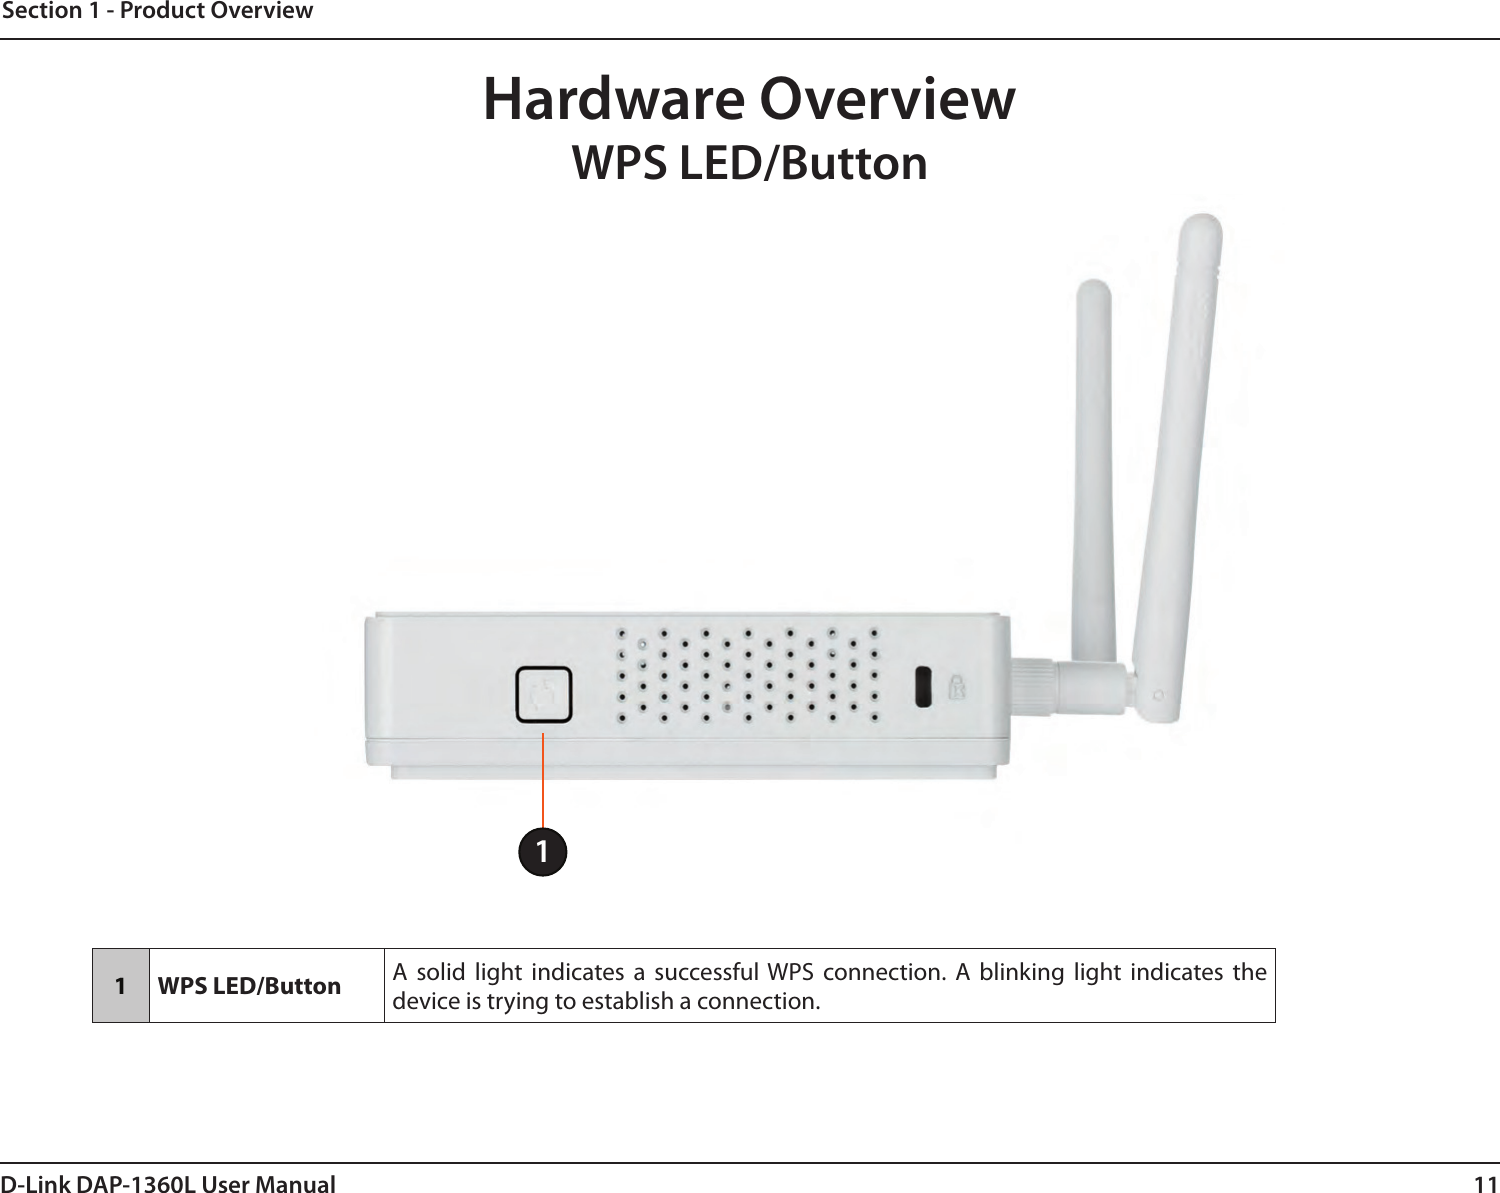 11D-Link DAP-1360L User ManualSection 1 - Product OverviewHardware OverviewWPS LED/Button11WPS LED/Button A  solid  light  indicates  a  successful WPS  connection.  A  blinking  light  indicates  the device is trying to establish a connection.